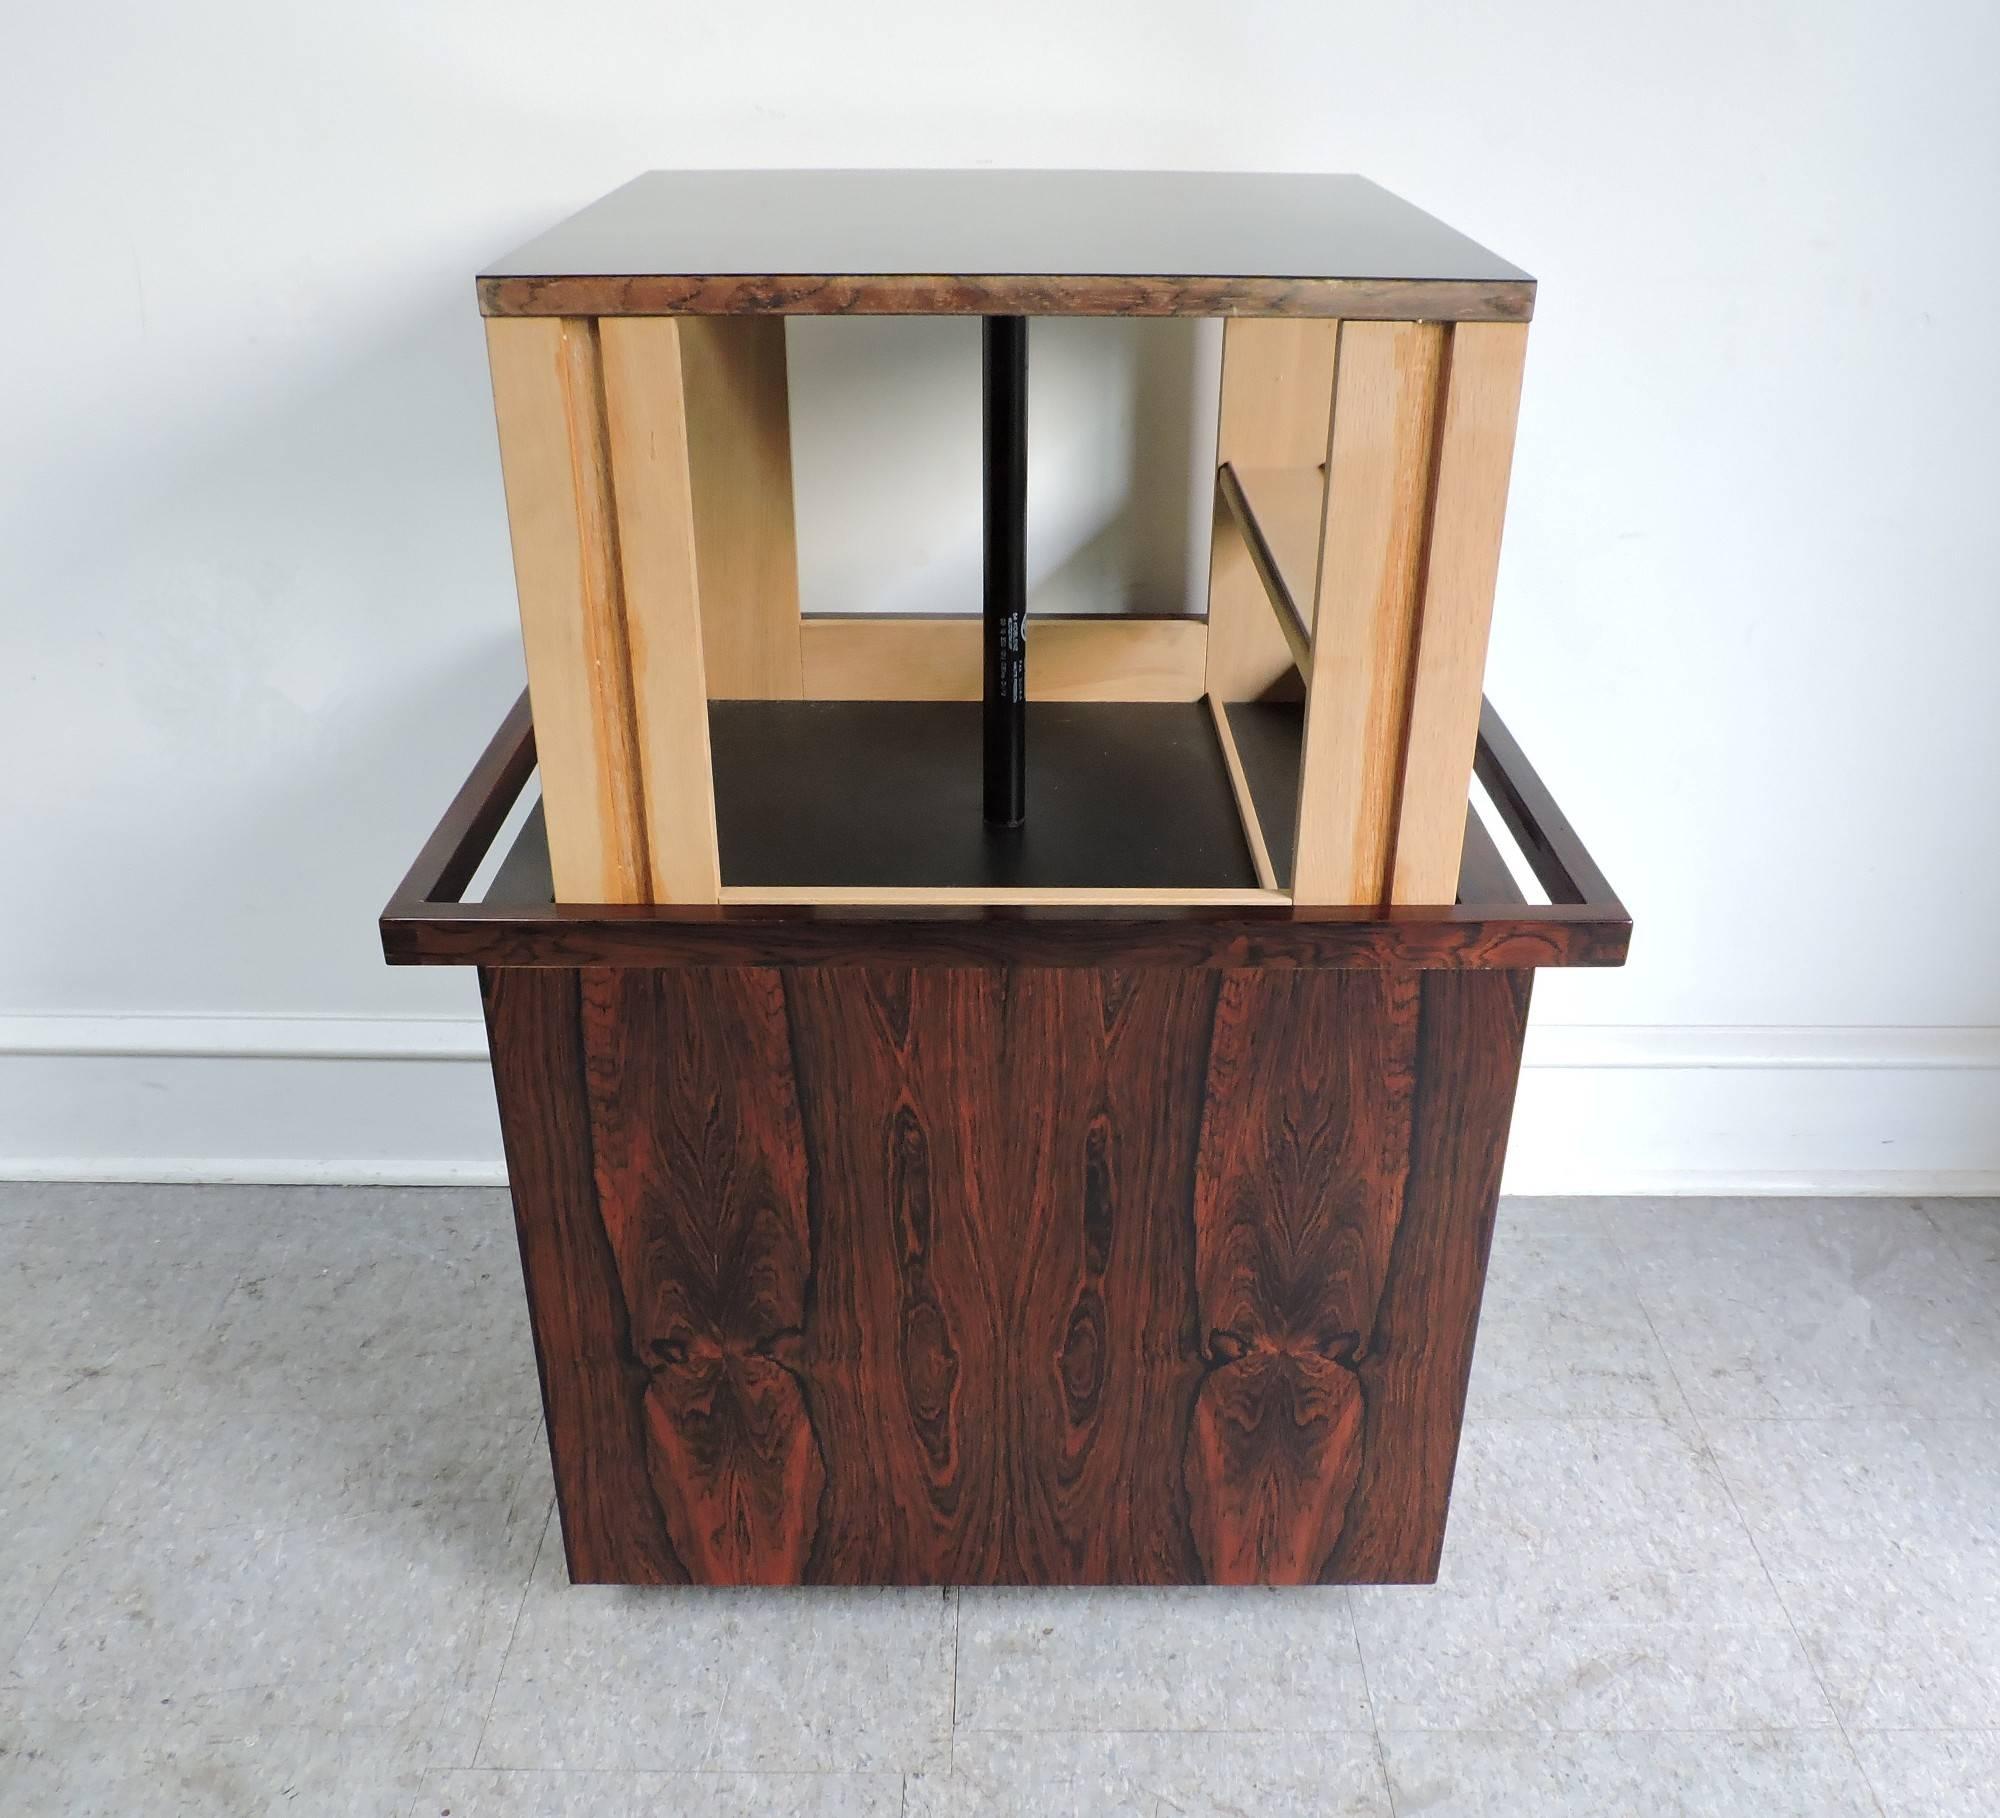 Very cool and handsome bar cart cabinet or table designed by Kai Kristiansen and made in Denmark in the 1960s. This cart has beautiful rosewood grain with a water resistant black formica top, and has a unique hidden storage compartment that rises up